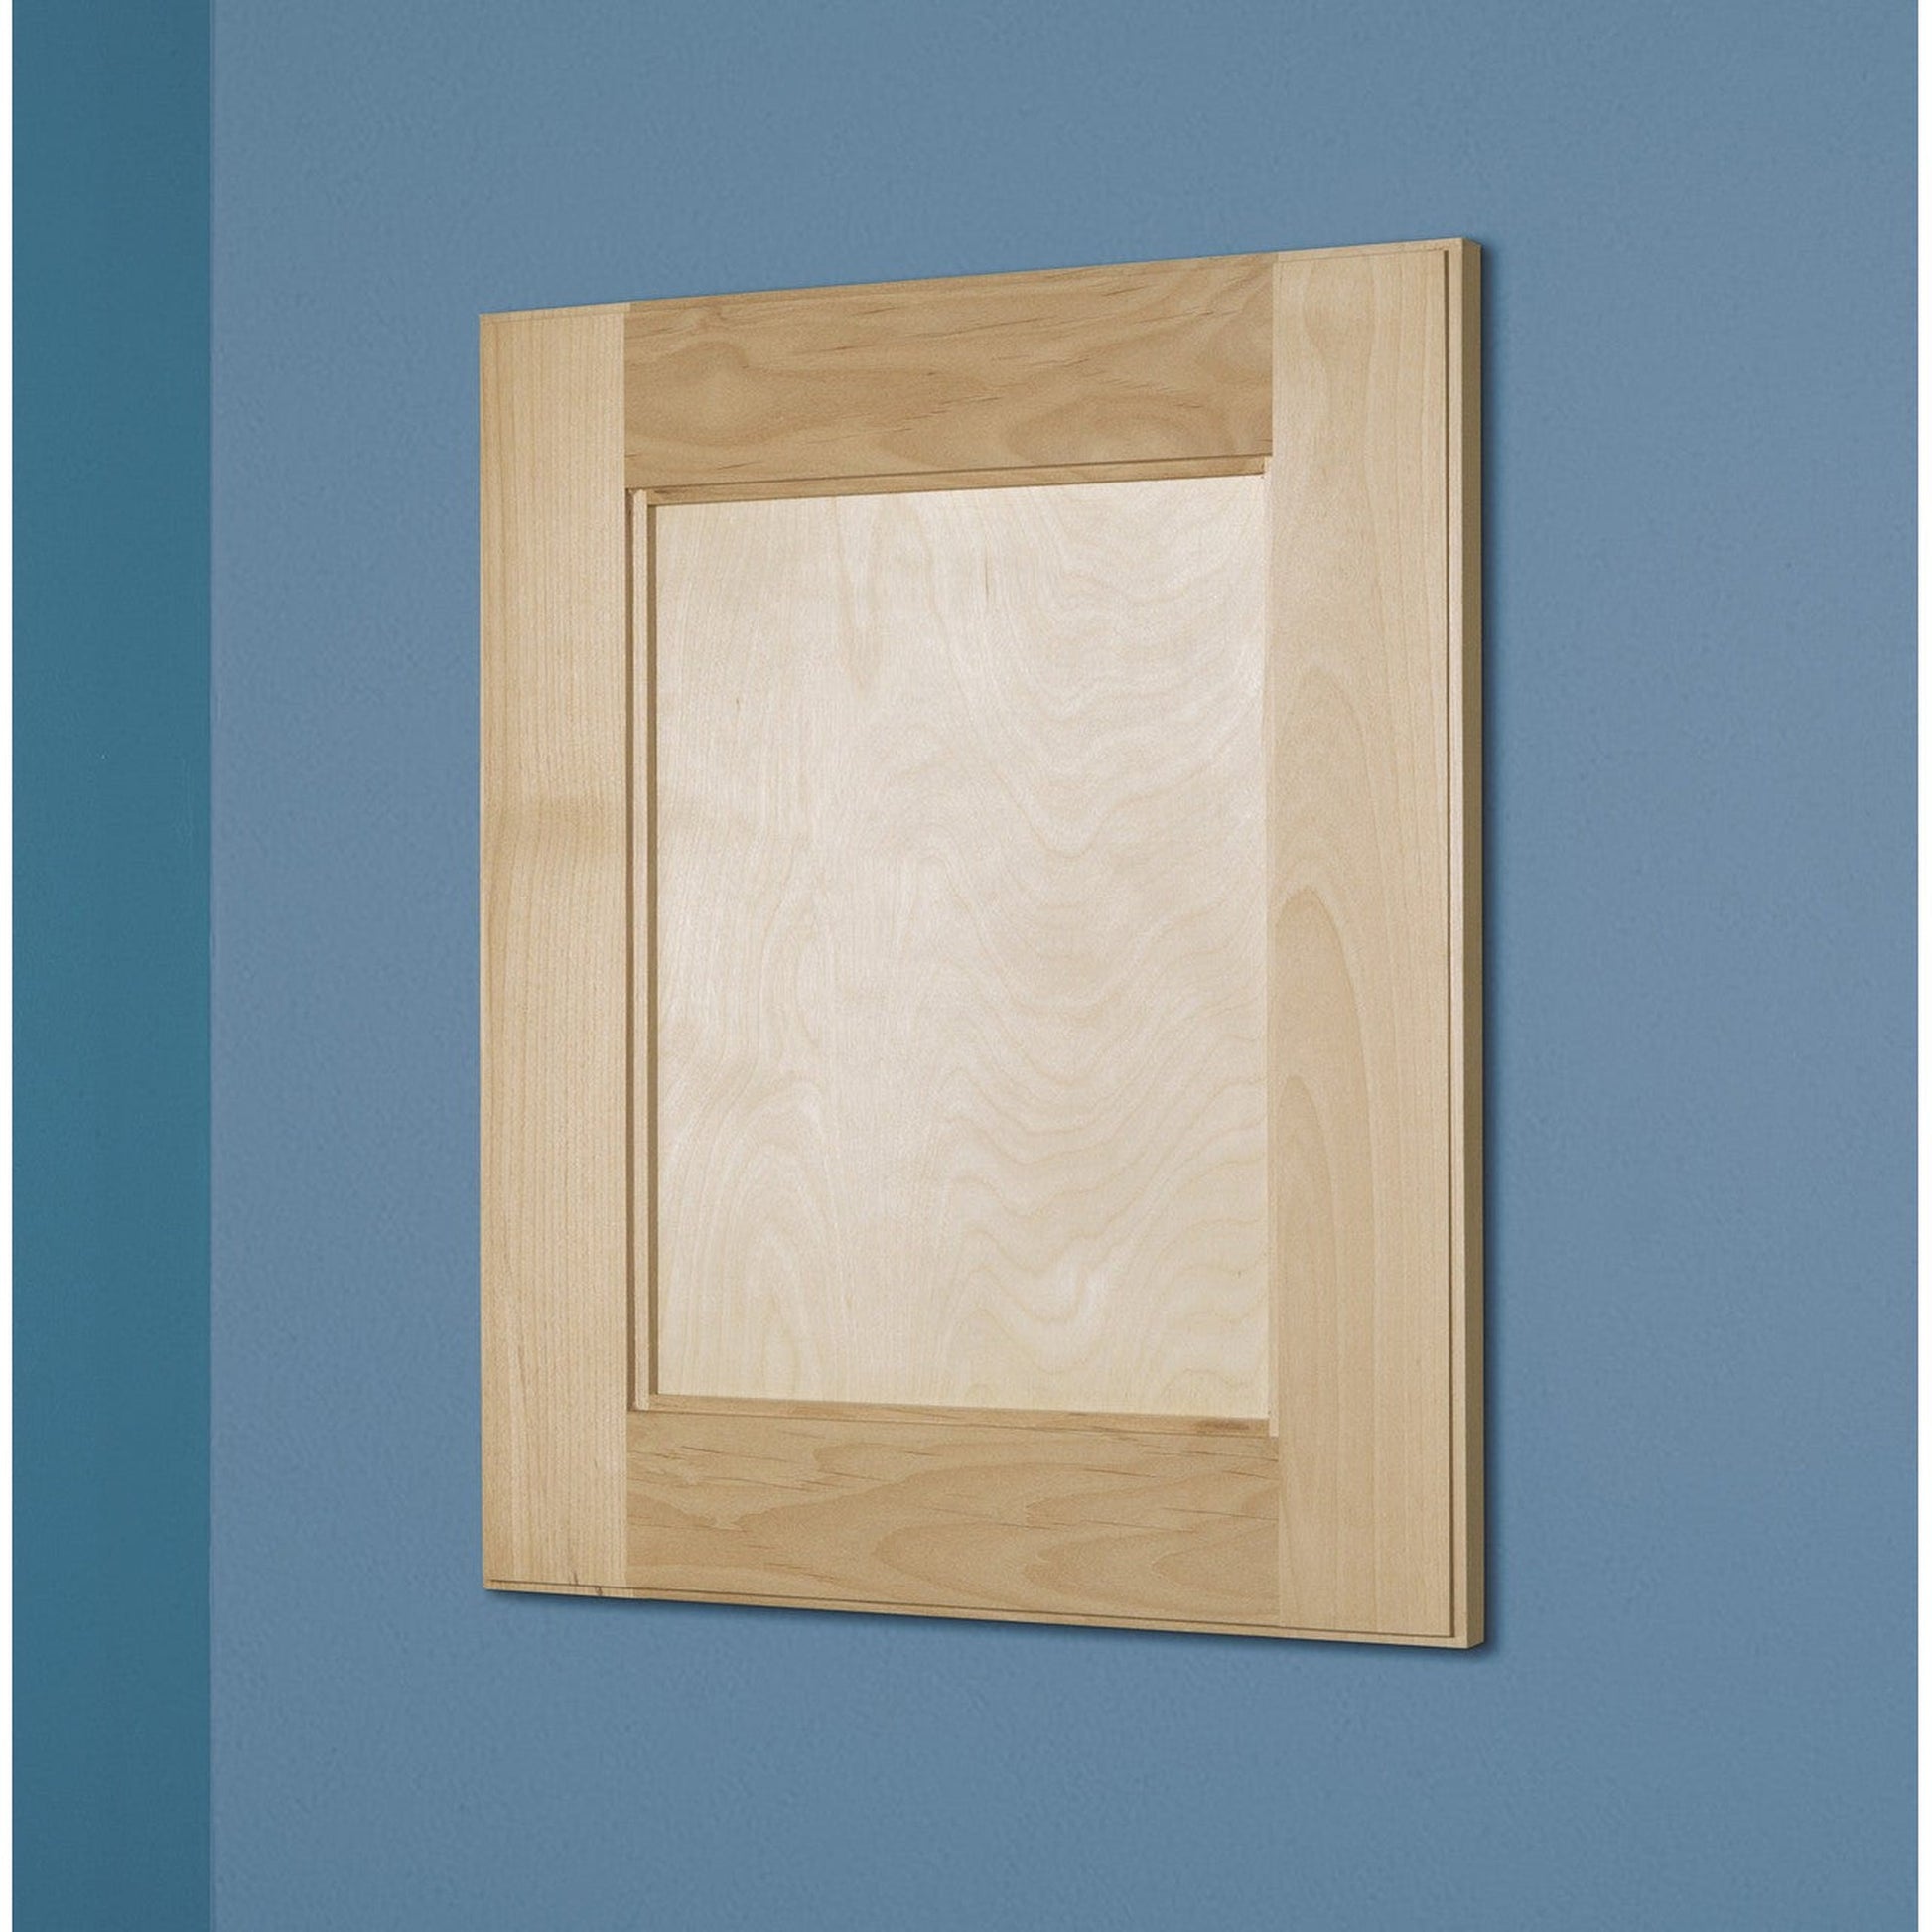 Fox Hollow Furnishings 14" x 18" Unfinished Style Beadboard Natural Interior Standard 4" Depth Recessed Medicine Cabinet With Mirror